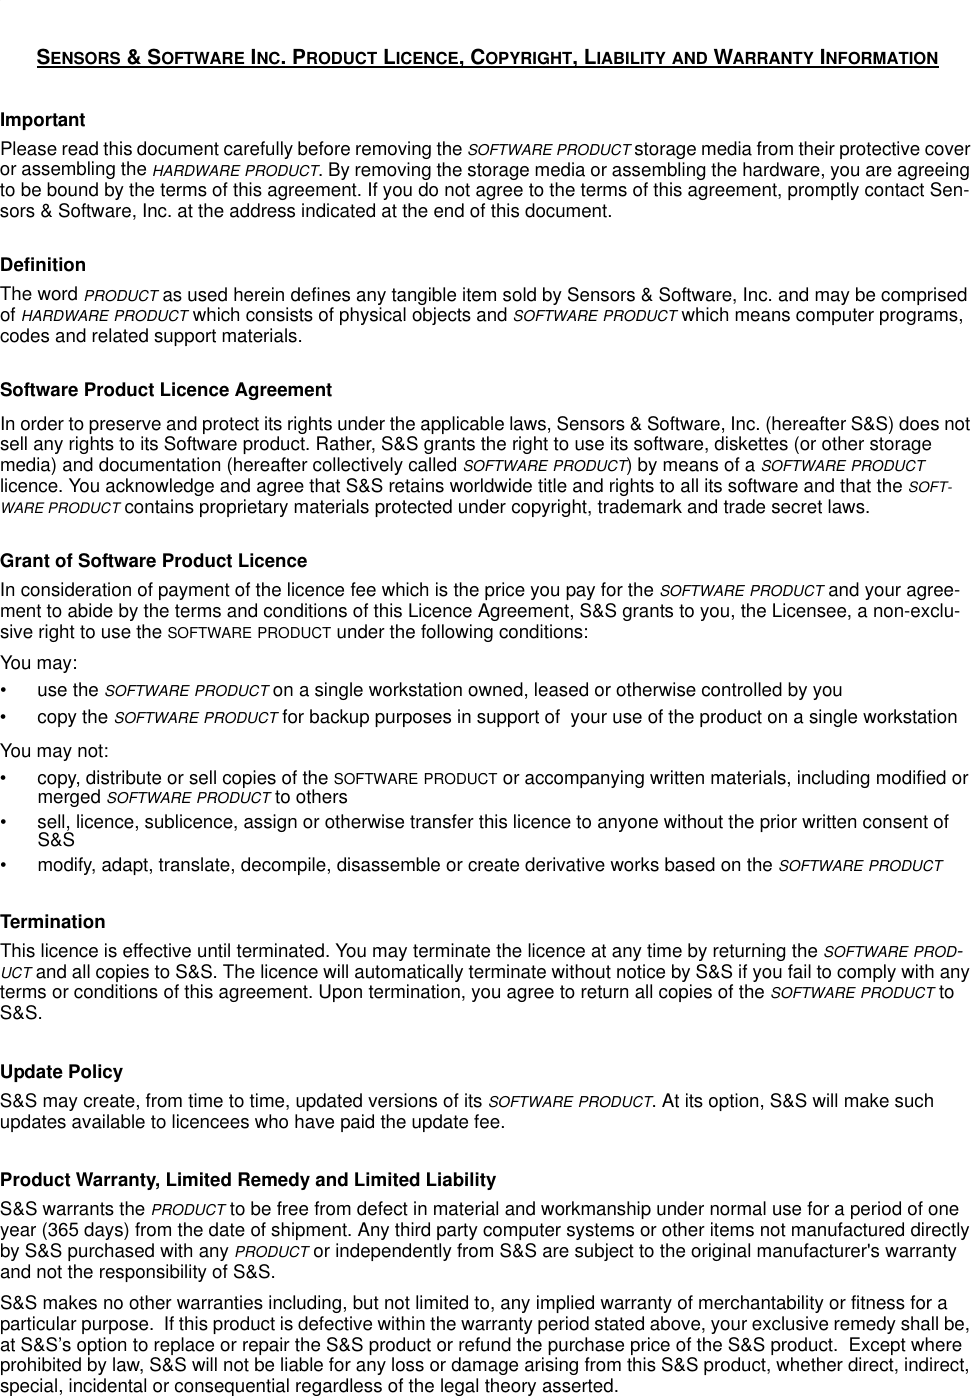 SENSORS &amp; SOFTWARE INC. PRODUCT LICENCE, COPYRIGHT, LIABILITY AND WARRANTY INFORMATIONImportantPlease read this document carefully before removing the SOFTWARE PRODUCT storage media from their protective cover or assembling the HARDWARE PRODUCT. By removing the storage media or assembling the hardware, you are agreeing to be bound by the terms of this agreement. If you do not agree to the terms of this agreement, promptly contact Sen-sors &amp; Software, Inc. at the address indicated at the end of this document.DefinitionThe word PRODUCT as used herein defines any tangible item sold by Sensors &amp; Software, Inc. and may be comprised of HARDWARE PRODUCT which consists of physical objects and SOFTWARE PRODUCT which means computer programs, codes and related support materials.Software Product Licence AgreementIn order to preserve and protect its rights under the applicable laws, Sensors &amp; Software, Inc. (hereafter S&amp;S) does not sell any rights to its Software product. Rather, S&amp;S grants the right to use its software, diskettes (or other storage media) and documentation (hereafter collectively called SOFTWARE PRODUCT) by means of a SOFTWARE PRODUCT licence. You acknowledge and agree that S&amp;S retains worldwide title and rights to all its software and that the SOFT-WARE PRODUCT contains proprietary materials protected under copyright, trademark and trade secret laws.Grant of Software Product LicenceIn consideration of payment of the licence fee which is the price you pay for the SOFTWARE PRODUCT and your agree-ment to abide by the terms and conditions of this Licence Agreement, S&amp;S grants to you, the Licensee, a non-exclu-sive right to use the SOFTWARE PRODUCT under the following conditions:You may:• use the SOFTWARE PRODUCT on a single workstation owned, leased or otherwise controlled by you• copy the SOFTWARE PRODUCT for backup purposes in support of  your use of the product on a single workstationYou may not:• copy, distribute or sell copies of the SOFTWARE PRODUCT or accompanying written materials, including modified or merged SOFTWARE PRODUCT to others• sell, licence, sublicence, assign or otherwise transfer this licence to anyone without the prior written consent of S&amp;S• modify, adapt, translate, decompile, disassemble or create derivative works based on the SOFTWARE PRODUCTTerminationThis licence is effective until terminated. You may terminate the licence at any time by returning the SOFTWARE PROD-UCT and all copies to S&amp;S. The licence will automatically terminate without notice by S&amp;S if you fail to comply with any terms or conditions of this agreement. Upon termination, you agree to return all copies of the SOFTWARE PRODUCT to S&amp;S.Update PolicyS&amp;S may create, from time to time, updated versions of its SOFTWARE PRODUCT. At its option, S&amp;S will make such updates available to licencees who have paid the update fee.Product Warranty, Limited Remedy and Limited Liability S&amp;S warrants the PRODUCT to be free from defect in material and workmanship under normal use for a period of one year (365 days) from the date of shipment. Any third party computer systems or other items not manufactured directly by S&amp;S purchased with any PRODUCT or independently from S&amp;S are subject to the original manufacturer&apos;s warranty and not the responsibility of S&amp;S.S&amp;S makes no other warranties including, but not limited to, any implied warranty of merchantability or fitness for a particular purpose.  If this product is defective within the warranty period stated above, your exclusive remedy shall be, at S&amp;S’s option to replace or repair the S&amp;S product or refund the purchase price of the S&amp;S product.  Except where prohibited by law, S&amp;S will not be liable for any loss or damage arising from this S&amp;S product, whether direct, indirect, special, incidental or consequential regardless of the legal theory asserted.